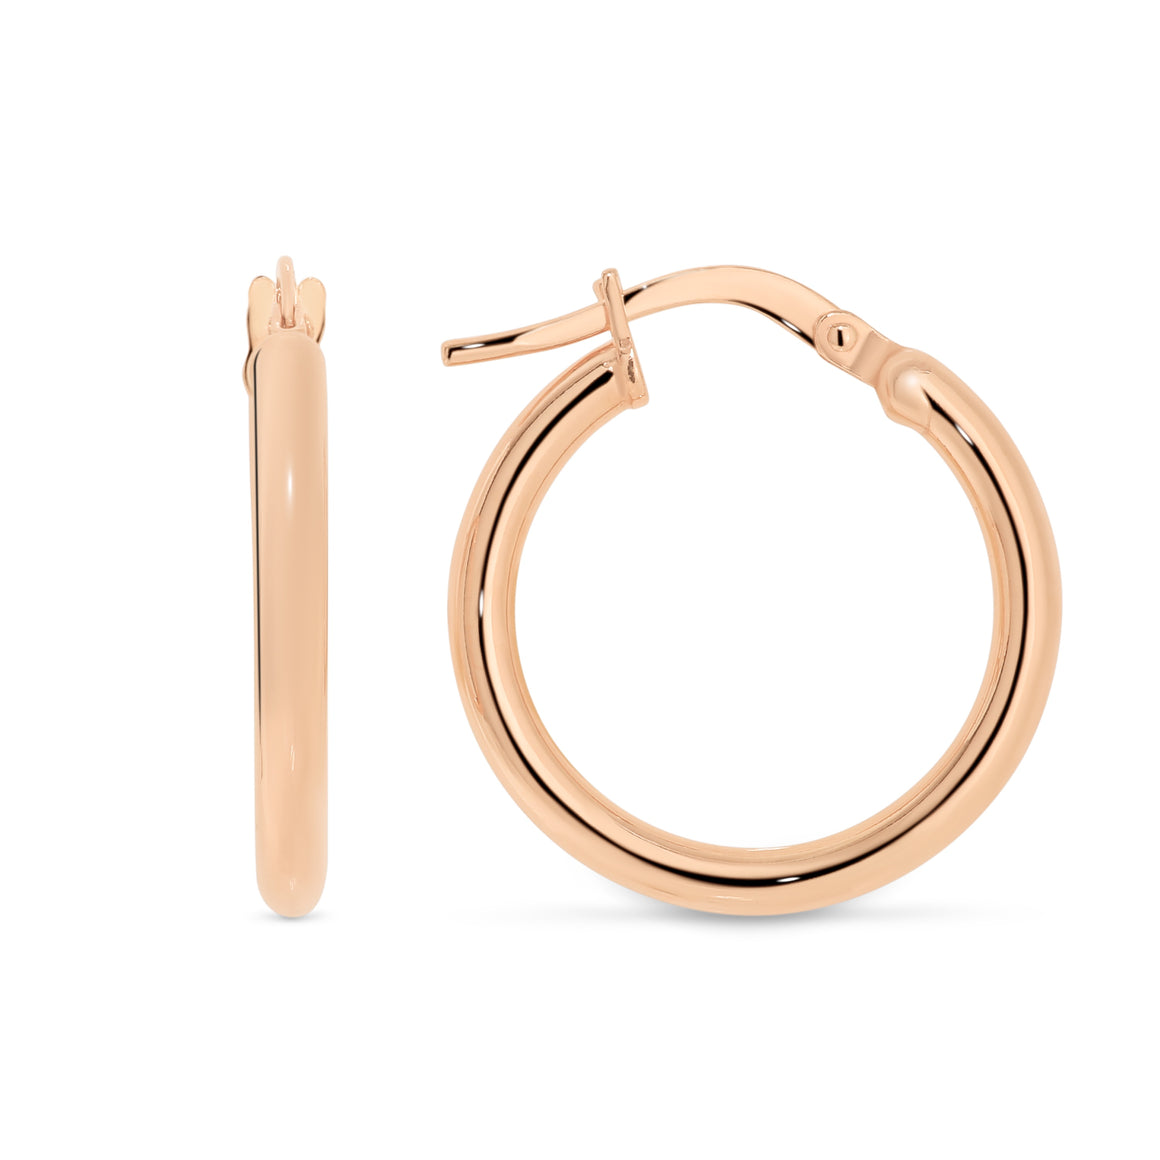 9ct Rose Gold/Silver Filled Small Hoop Earrings